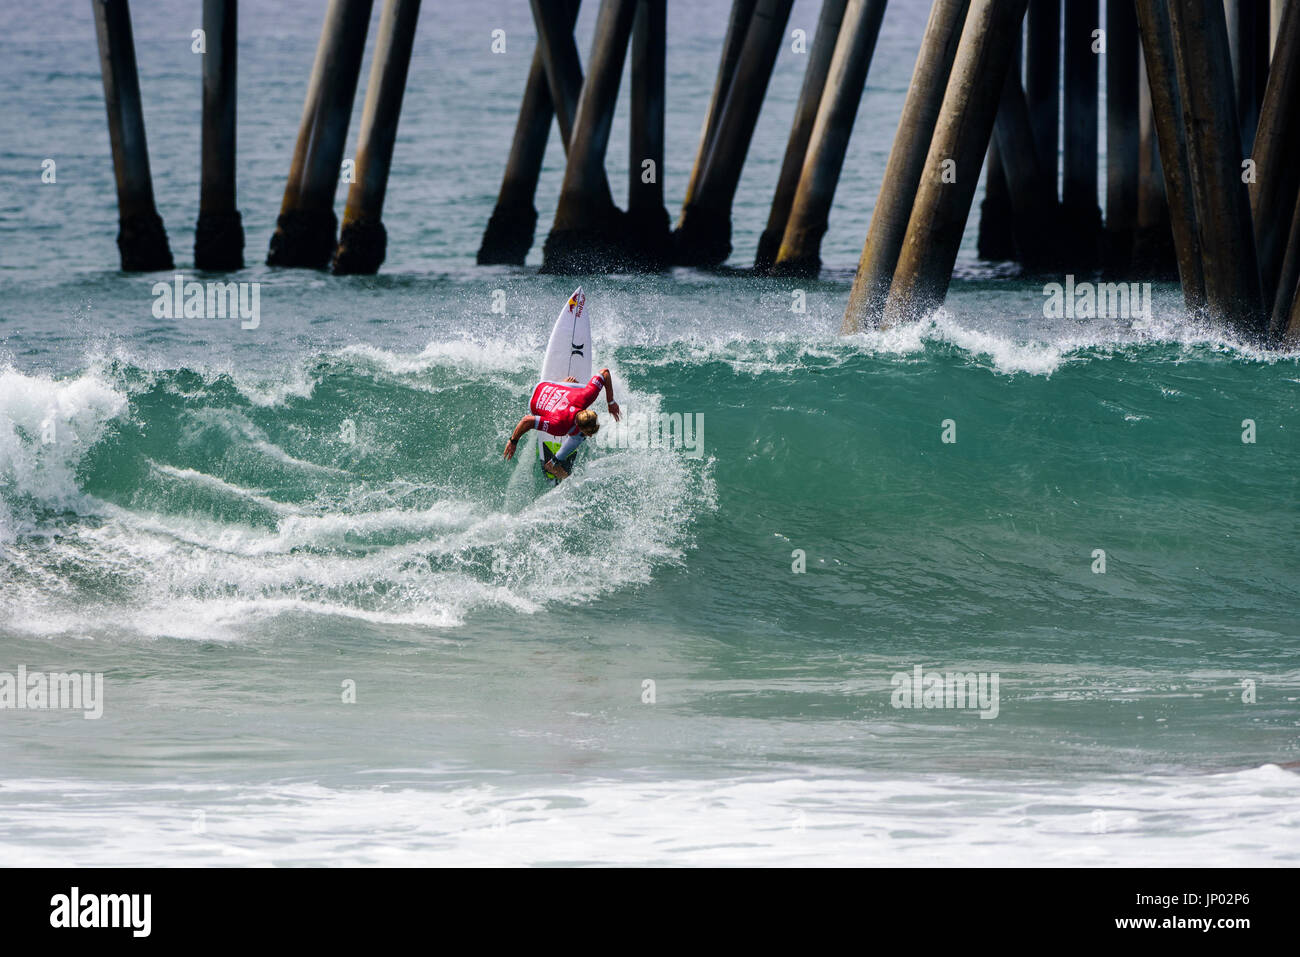 Huntington Beach, USA. 31 July, 2017. Local favorite Kolohe Andino (USA) put on a show for a beach crowded with fans during his round 2 heat win at the 2017 VANS US Open of Surfing. Credit: Benjamin Ginsberg/Alamy Live News. Stock Photo